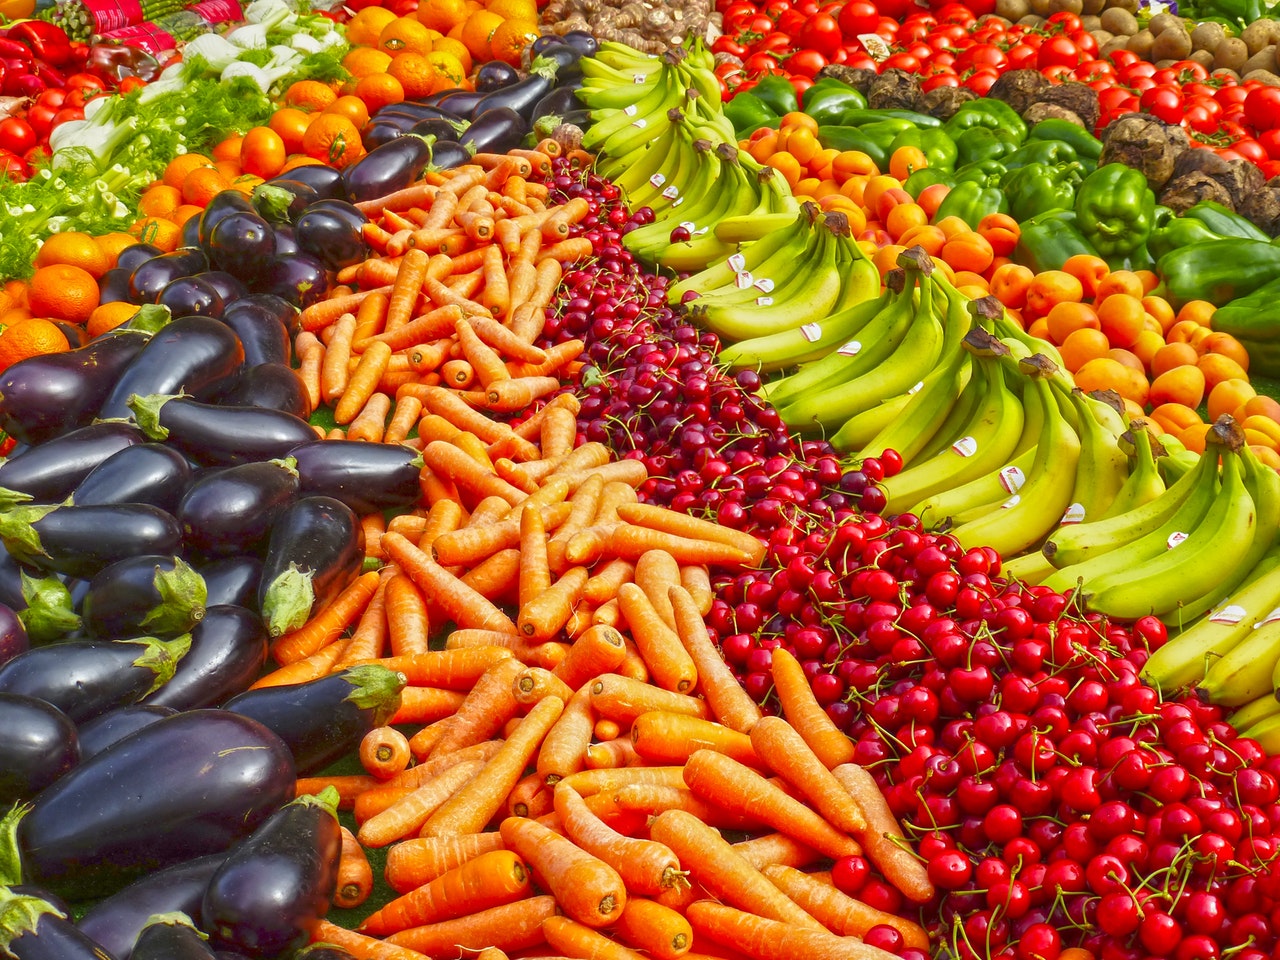 Image of fruits and veggies